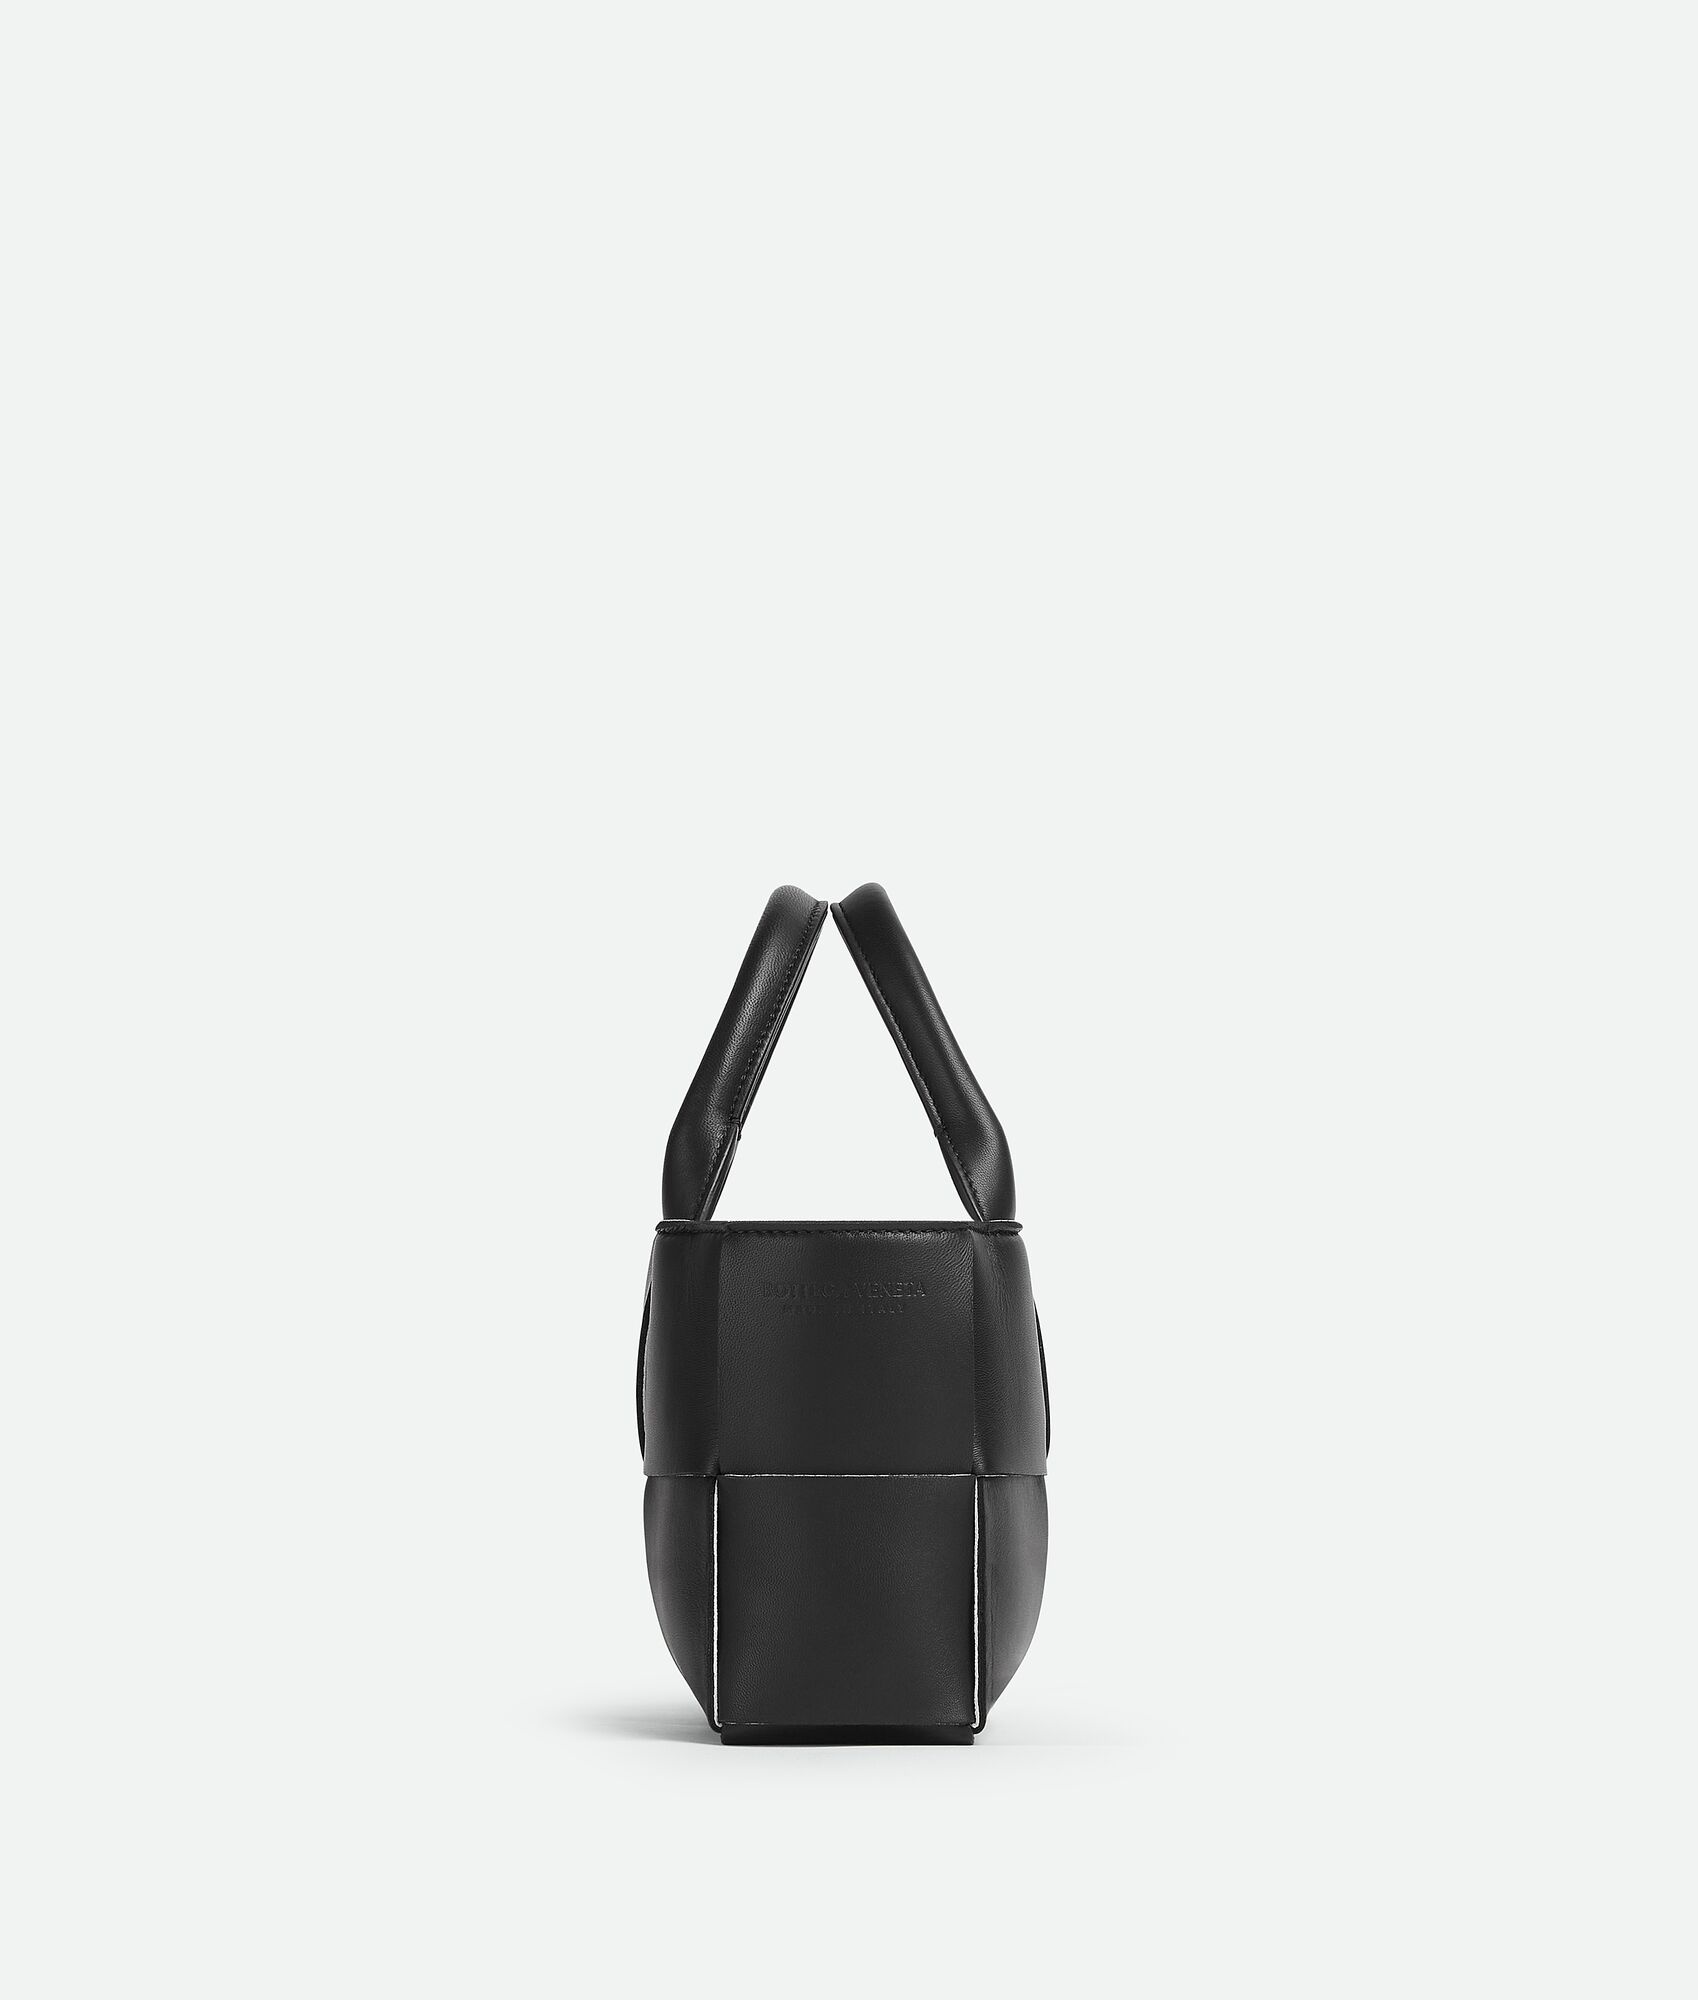 candy arco tote bag - 2